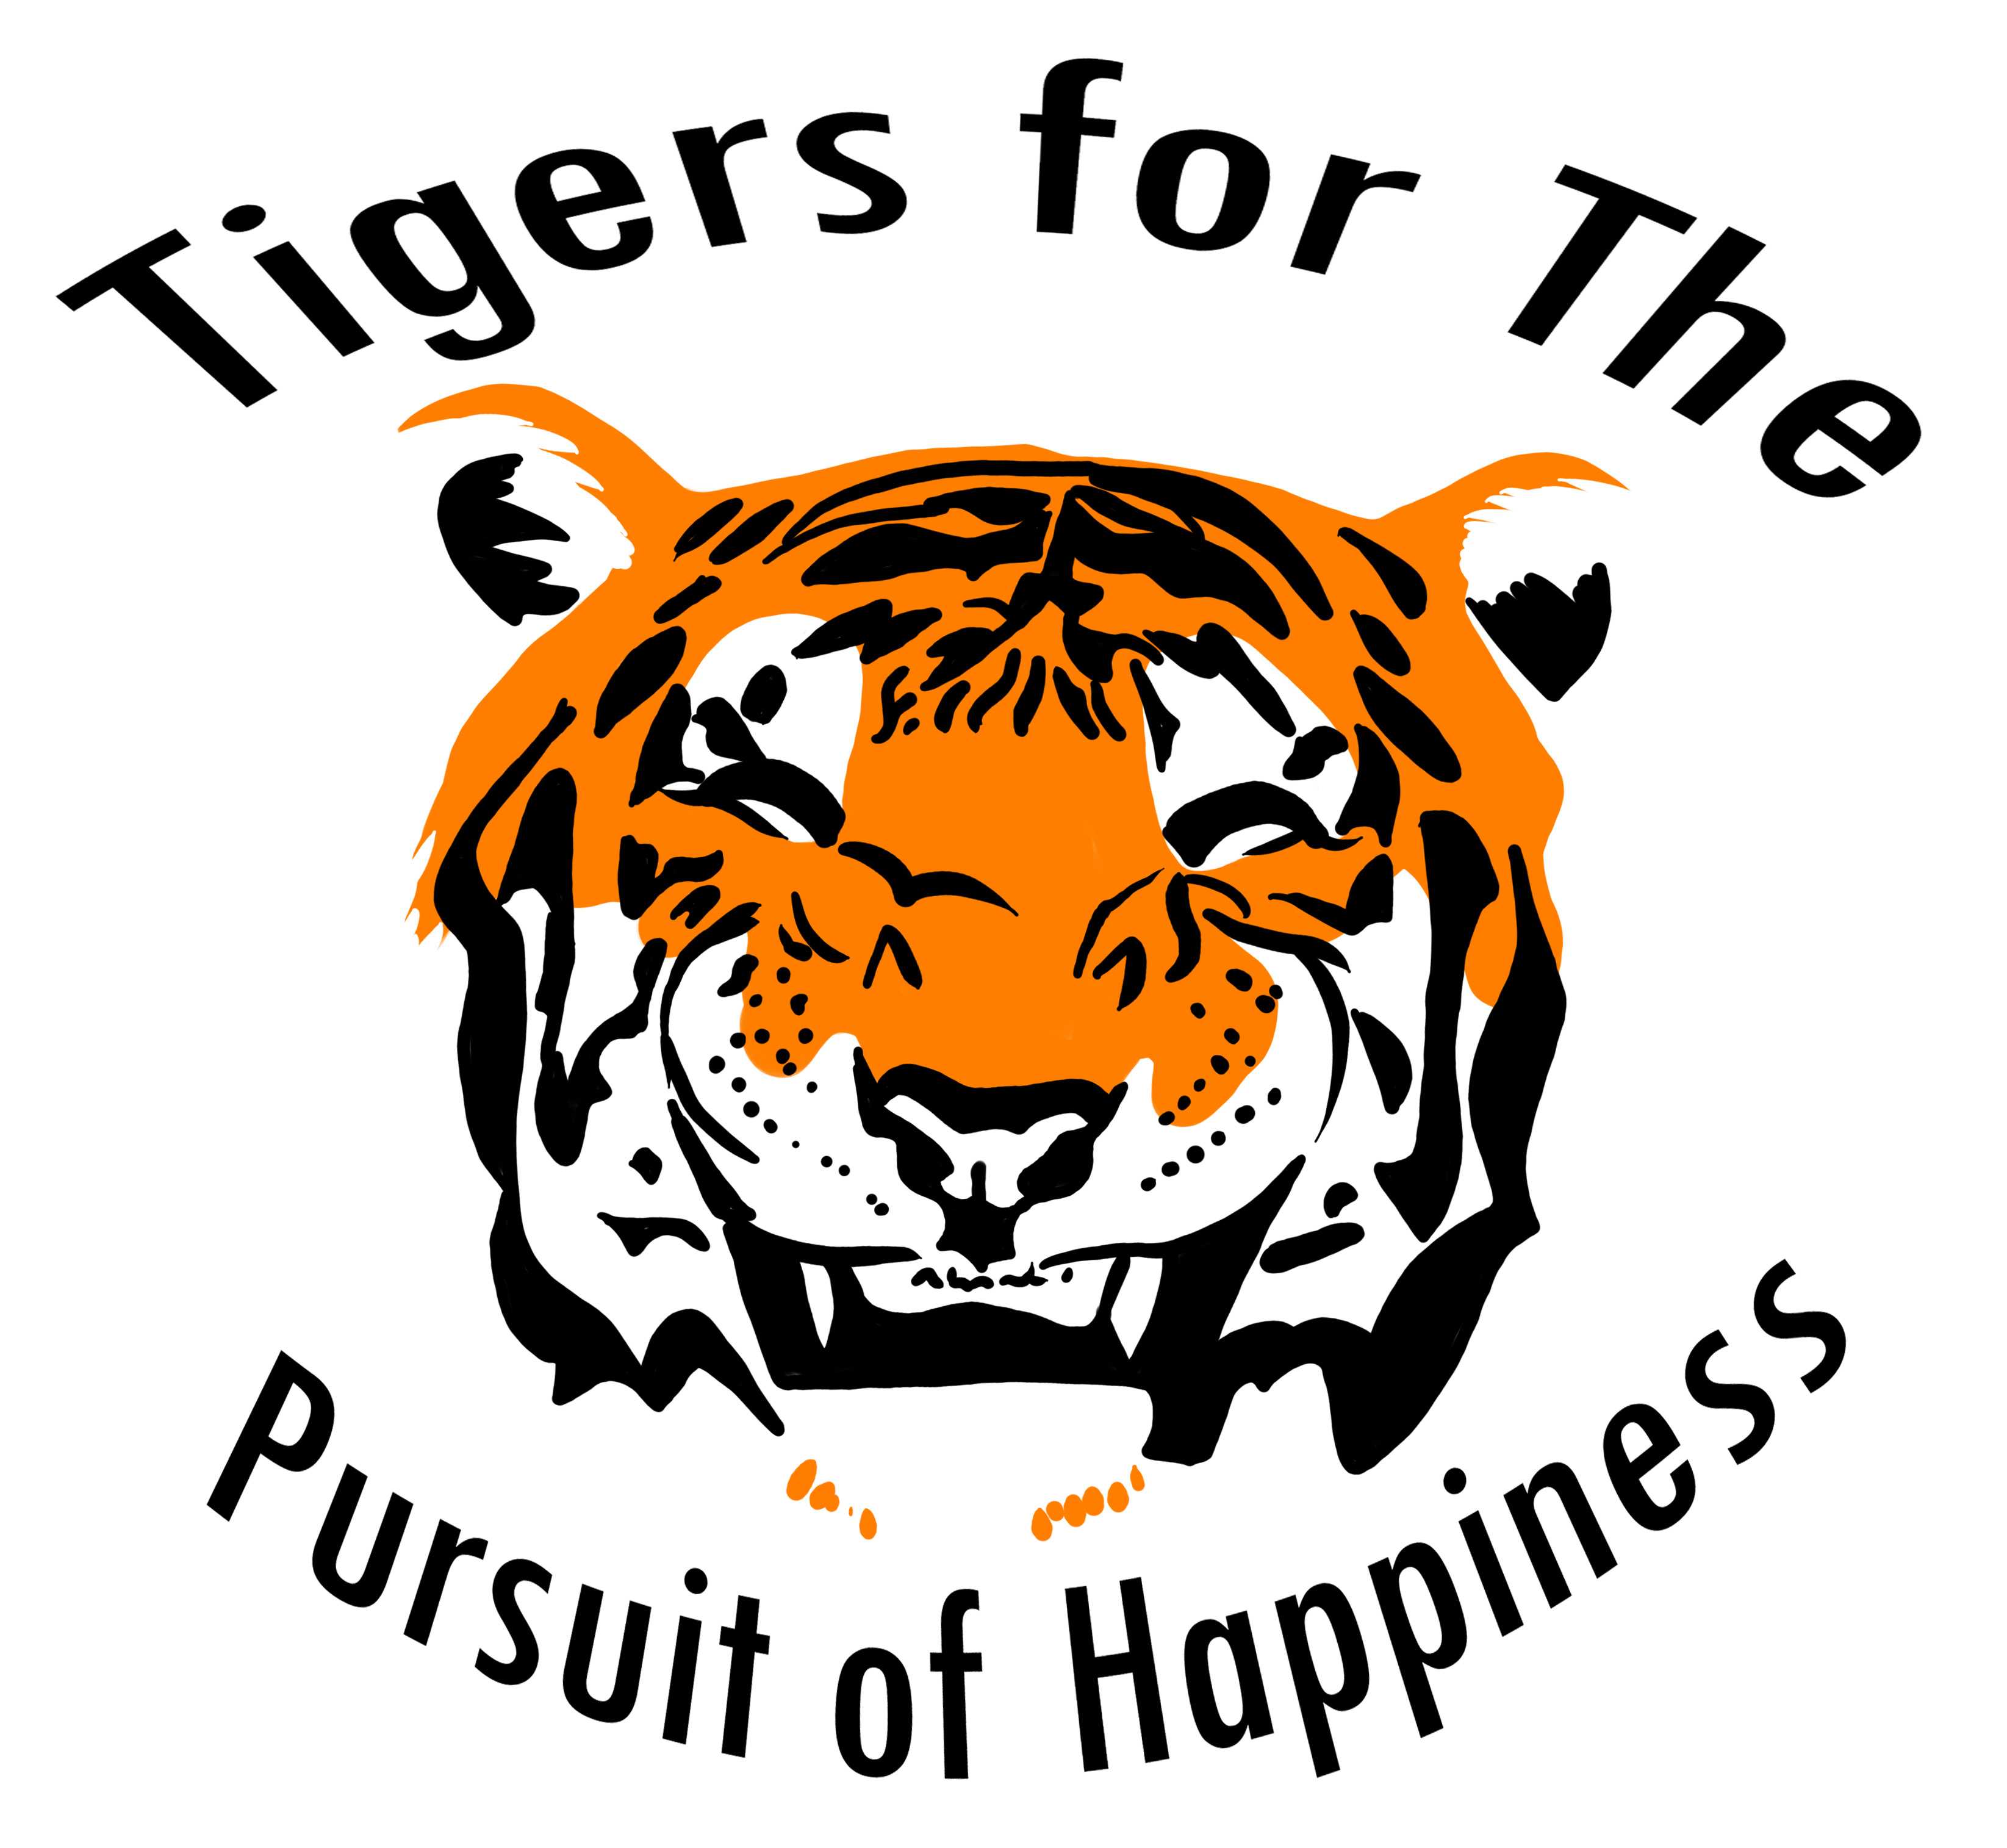 Introducing Tigers for the Pursuit of Happiness